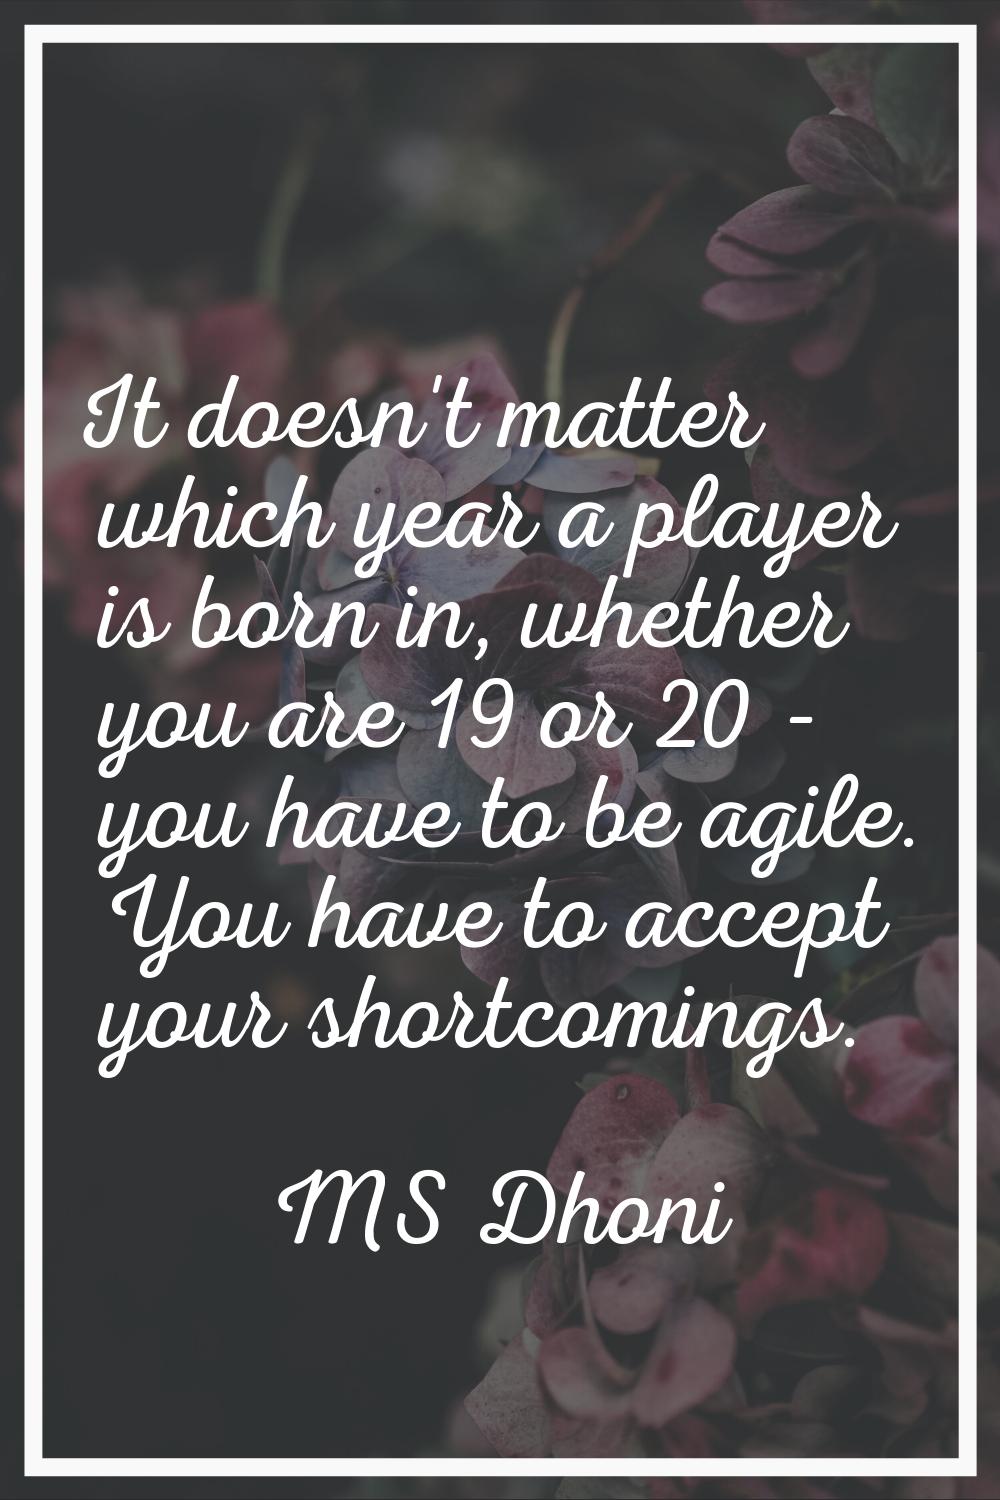 It doesn't matter which year a player is born in, whether you are 19 or 20 - you have to be agile. 